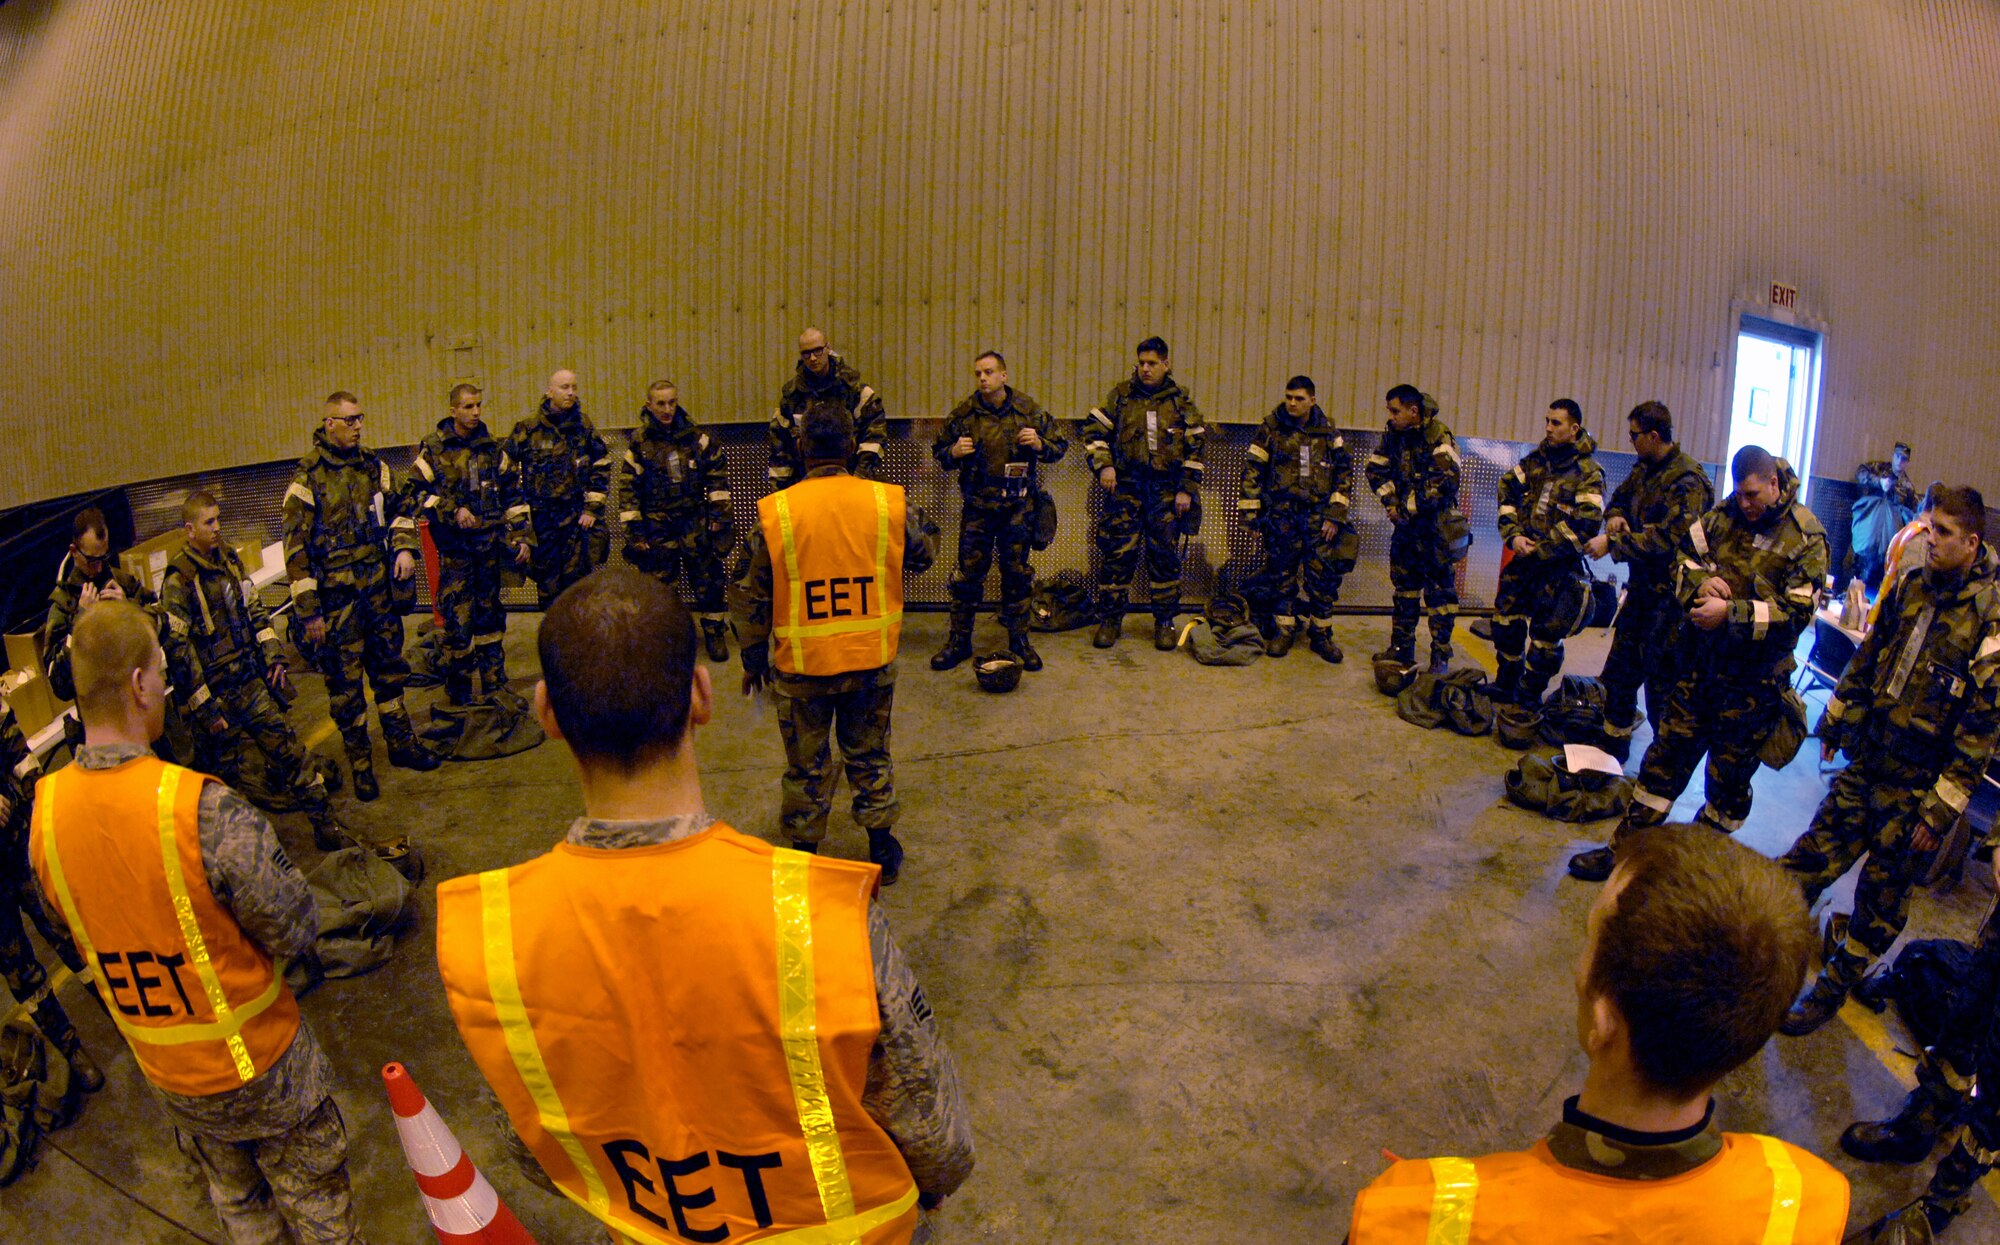 Senior Master Sgt. Cleofas Trejo (center) briefs members of the 354th Fighter Wing on the evaluation of the Ground Crew Ensemble portion of the GOLDEN RAVEN 08-02 operational readiness exercise on March 9, 2008 at Eielson Air Force Base, Alaska.  GOLDEN RAVEN's purpose is to evaluate the 354th Fighter Wing's ability to prepare and deploy personnel, equipment and support assets to a combat environment. The exercise consists of four graded areas: initial response and deployment, employment, ability to survive and operate (ATSO) and combat response.

(U.S Air Force photo by Staff Sgt. Eric T. Sheler)
